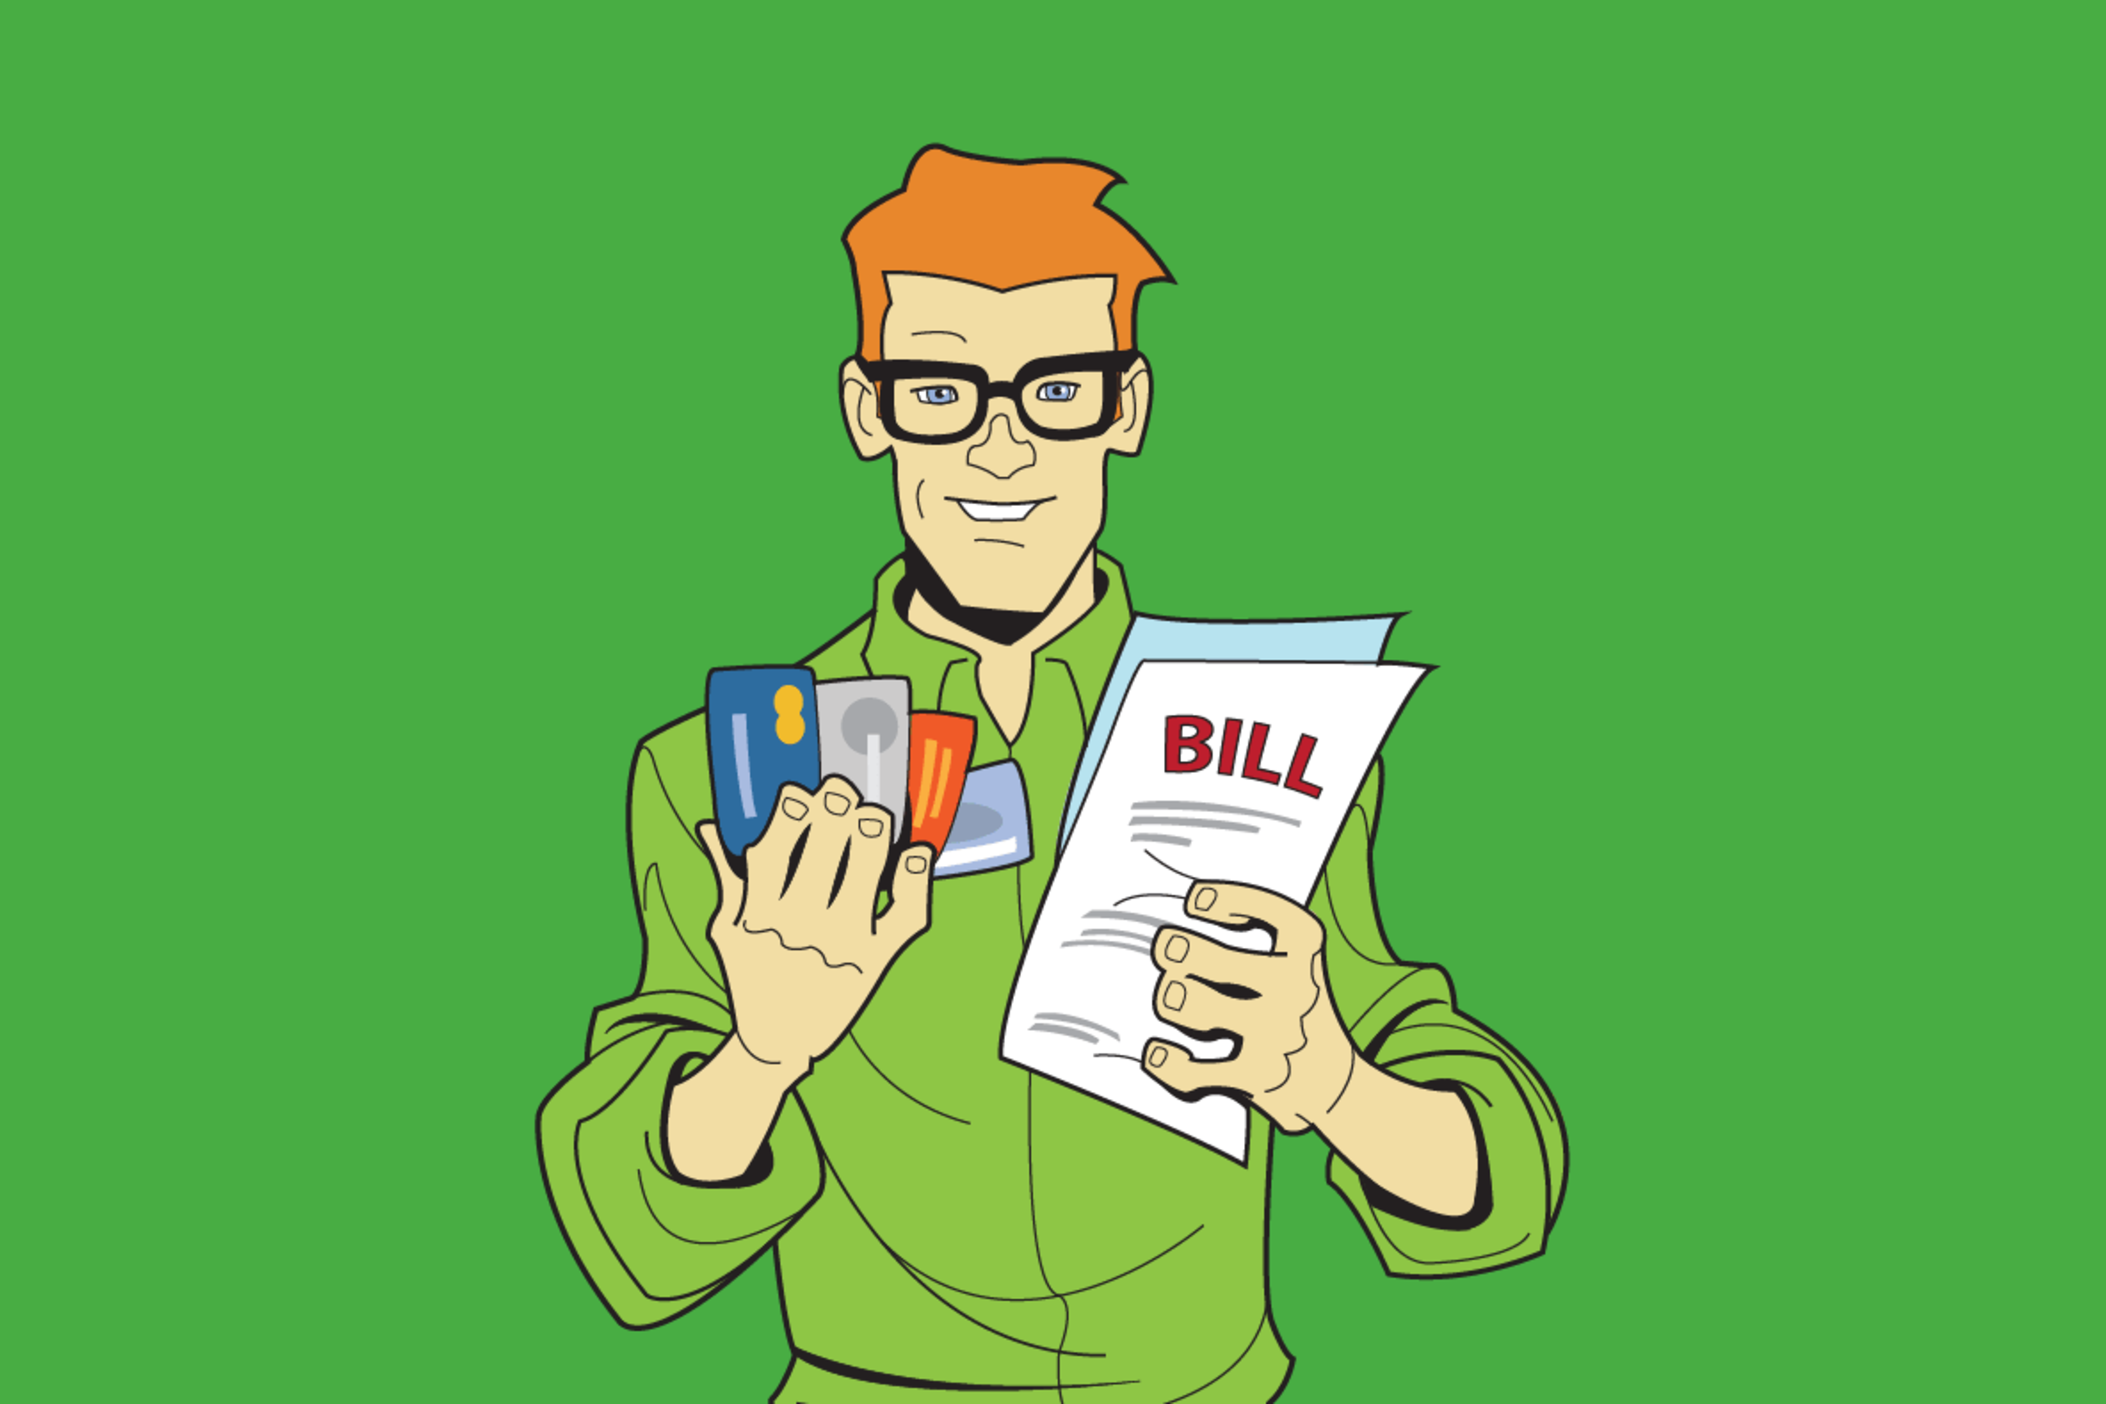 Consumer Ed with credit cards and bills